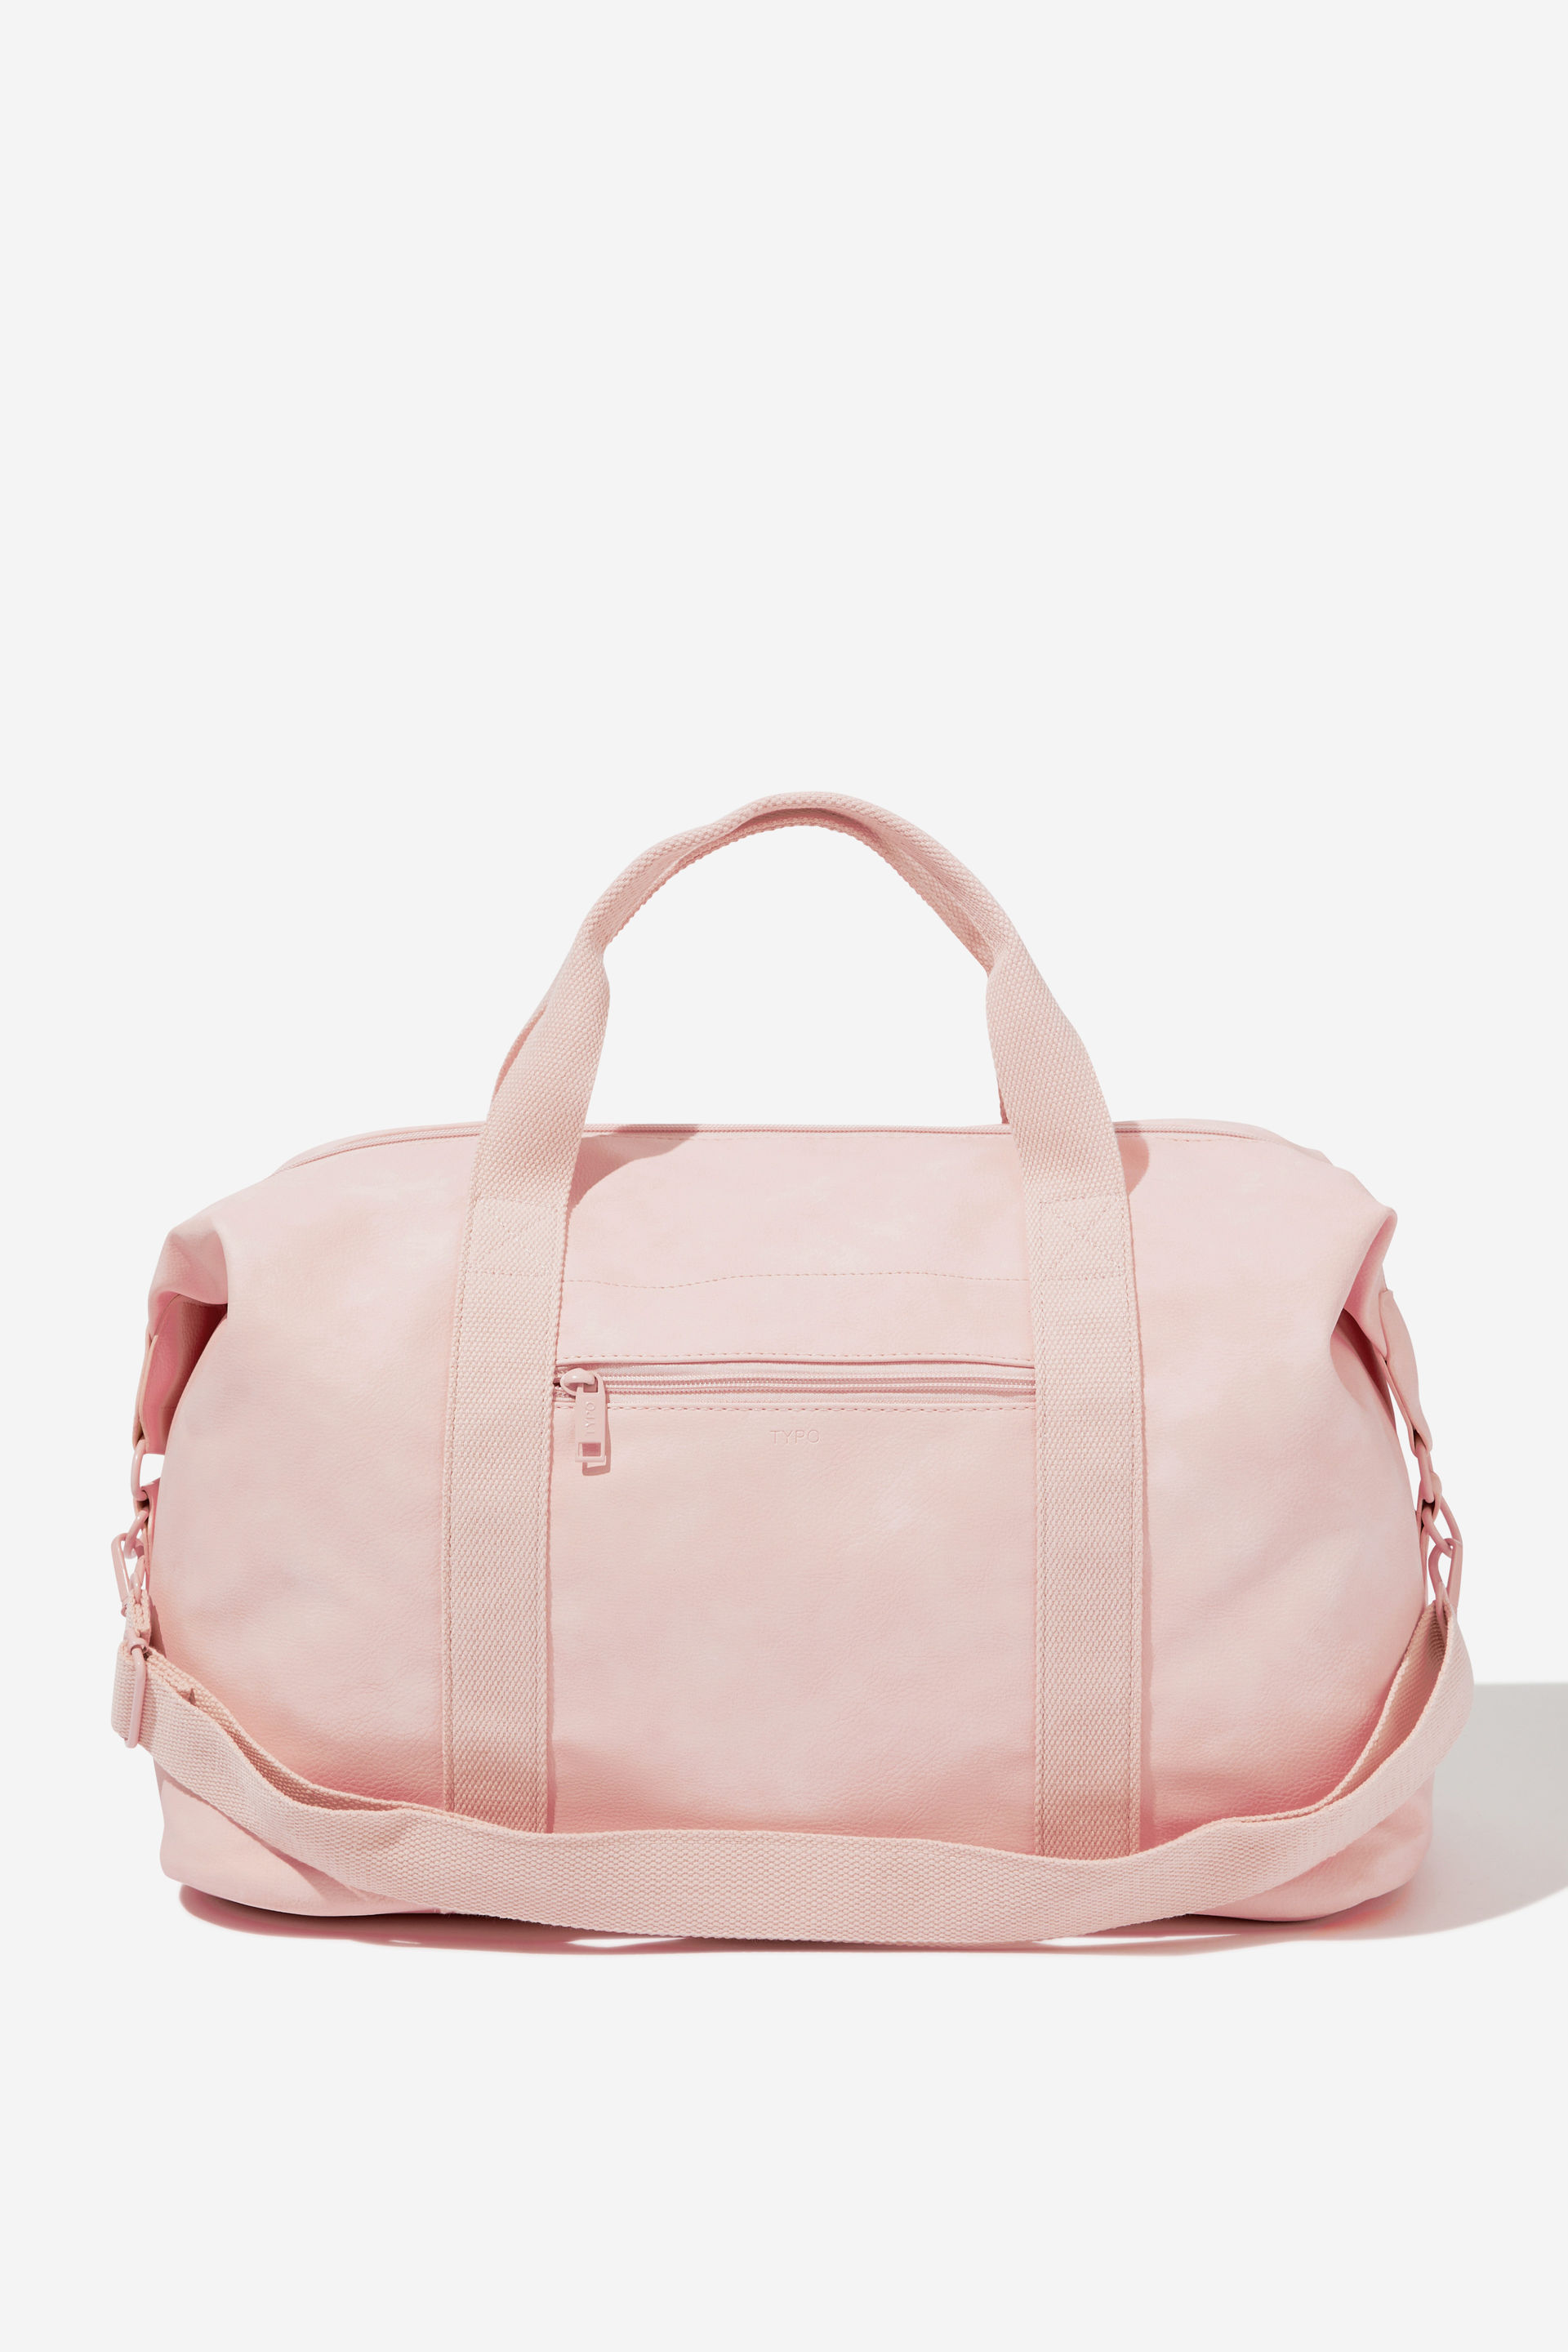 Typo - Off The Grid Hold All Duffle Bag - Ballet blush